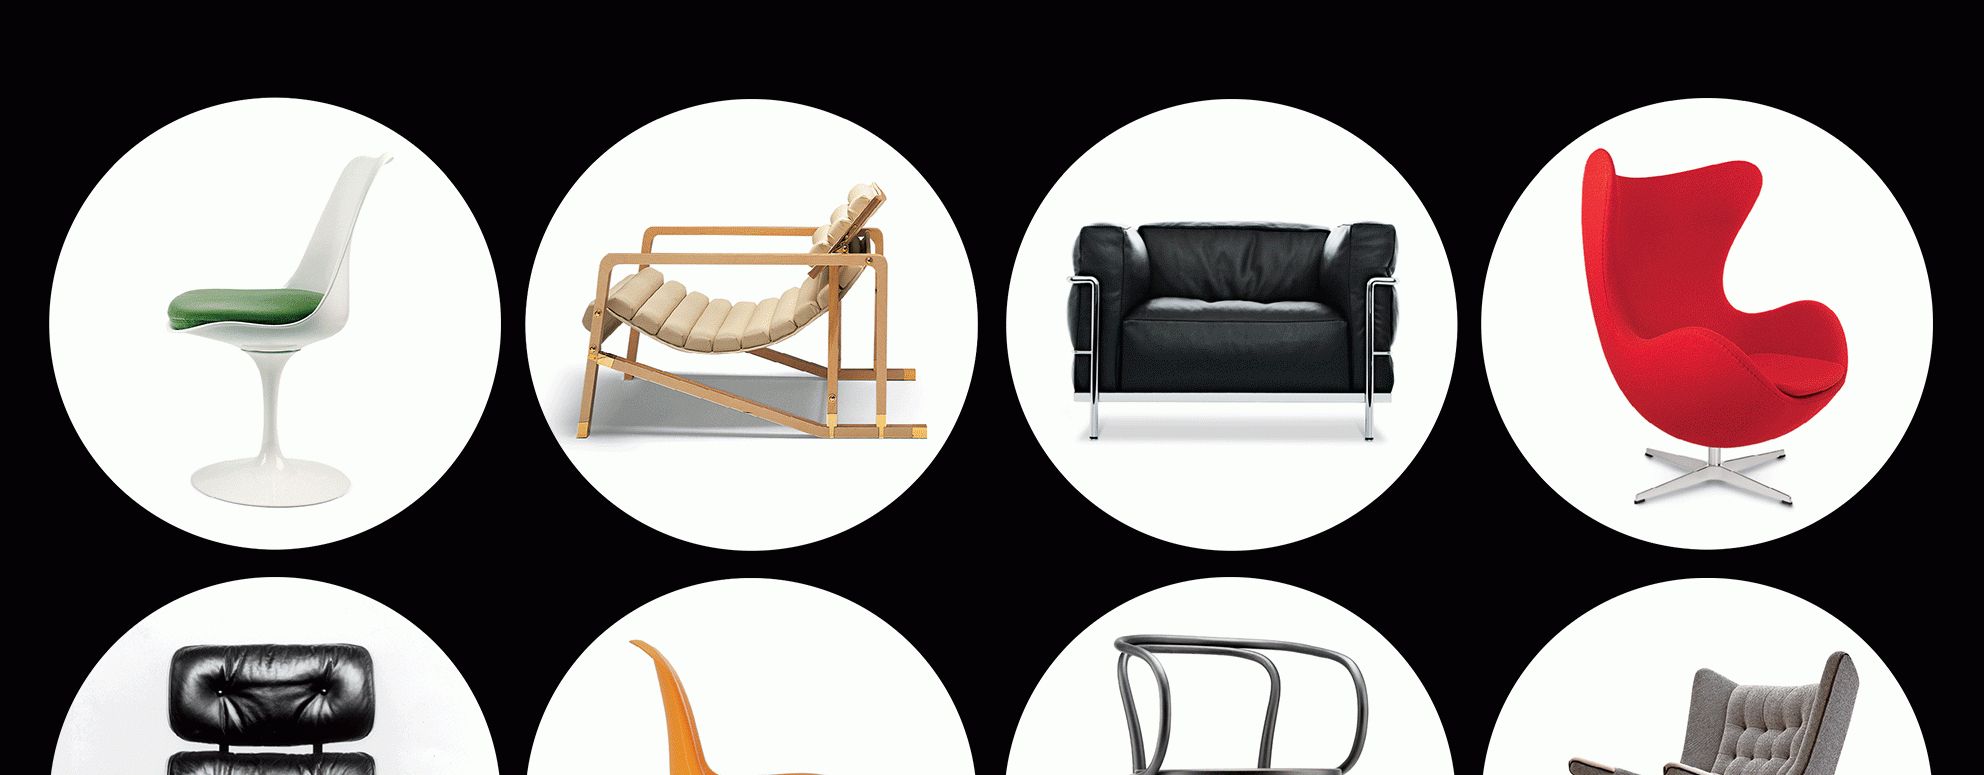 Oversize Wider Armrest Padded Lounge Chairs Intended For Favorite These Are The 12 Most Iconic Chairs Of All Time (View 25 of 25)